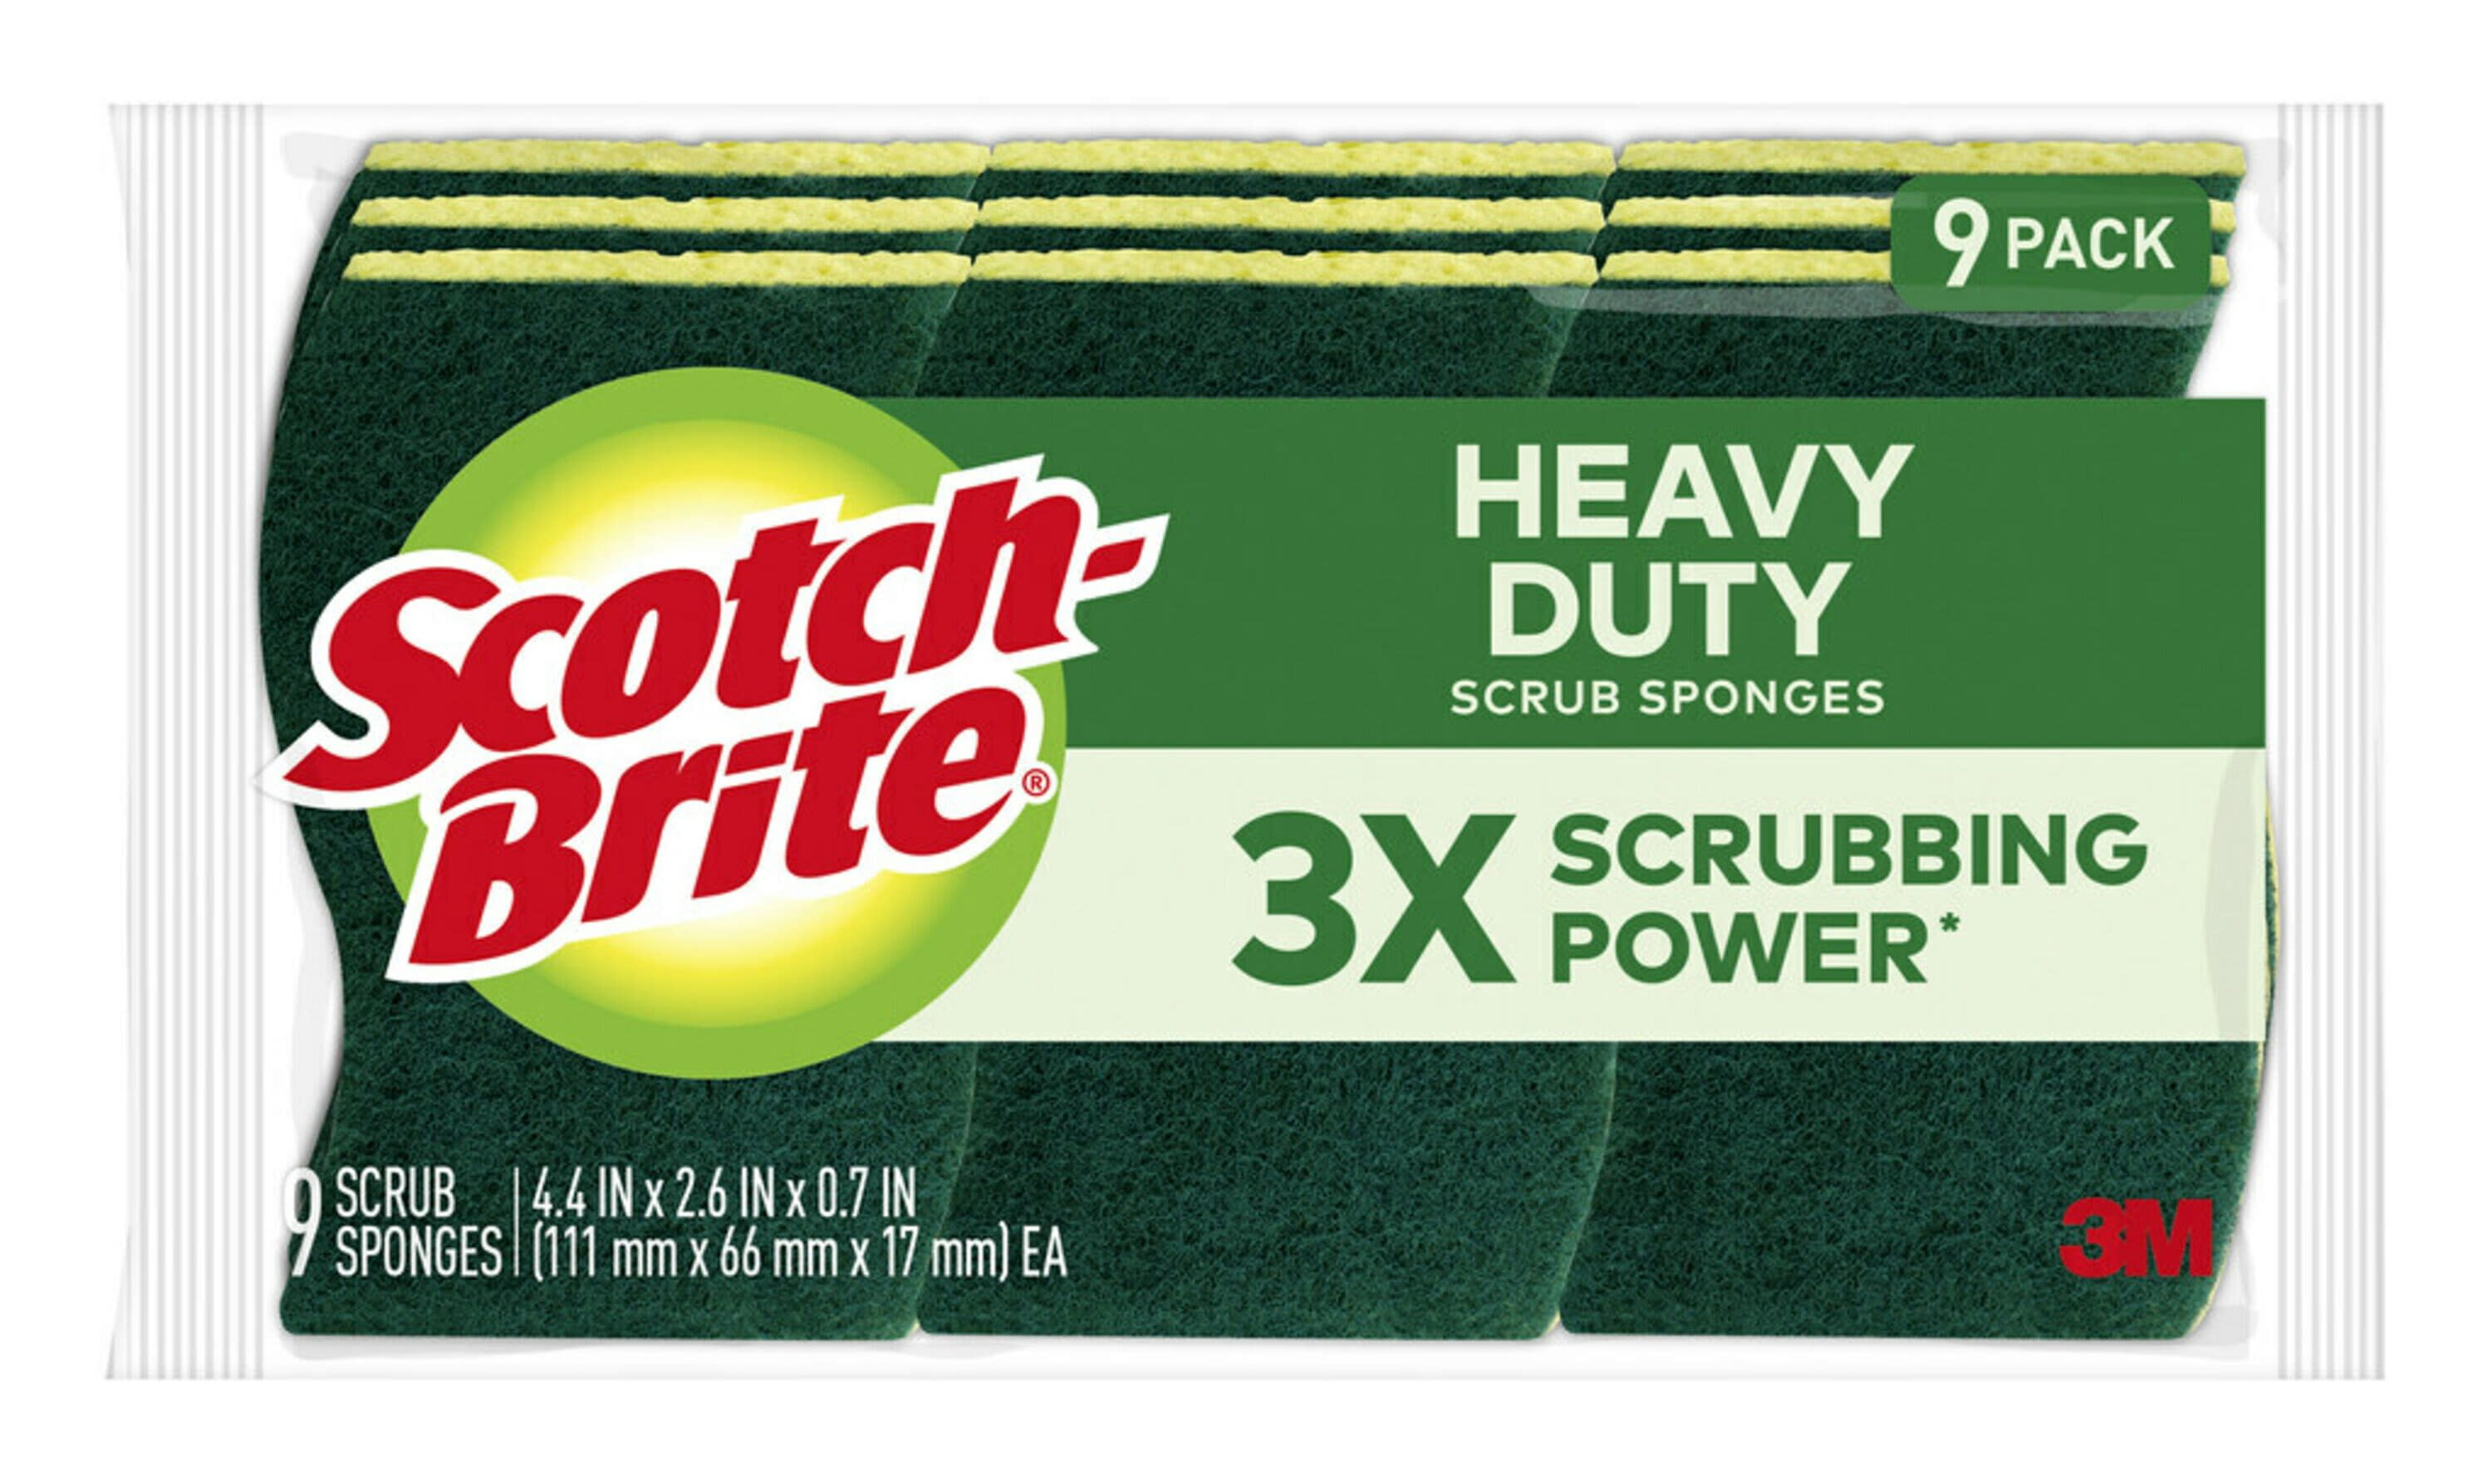 HDX Non-Scratch Scrub Sponge with Scour Pad (9-Count) 05701 - The